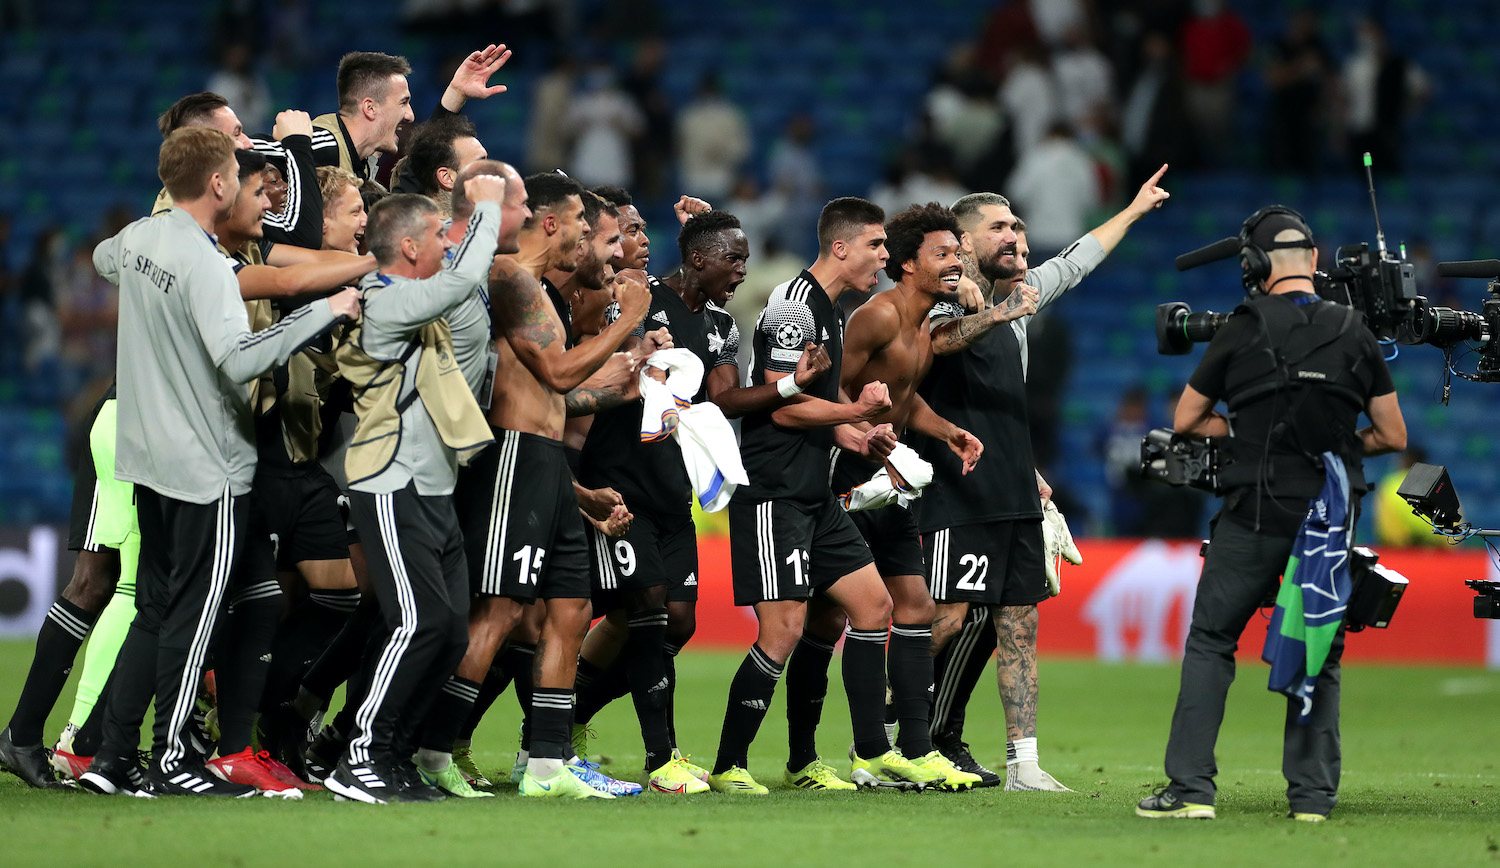 MADRID, SPAIN - SEPTEMBER 28: Players of FC Sheriff celebrate after victory in the UEFA Champions League group D match between Real Madrid and FC Sheriff at Estadio Santiago Bernabeu on September 28, 2021 in Madrid, Spain. (Photo by Gonzalo Arroyo Moreno/Getty Images)